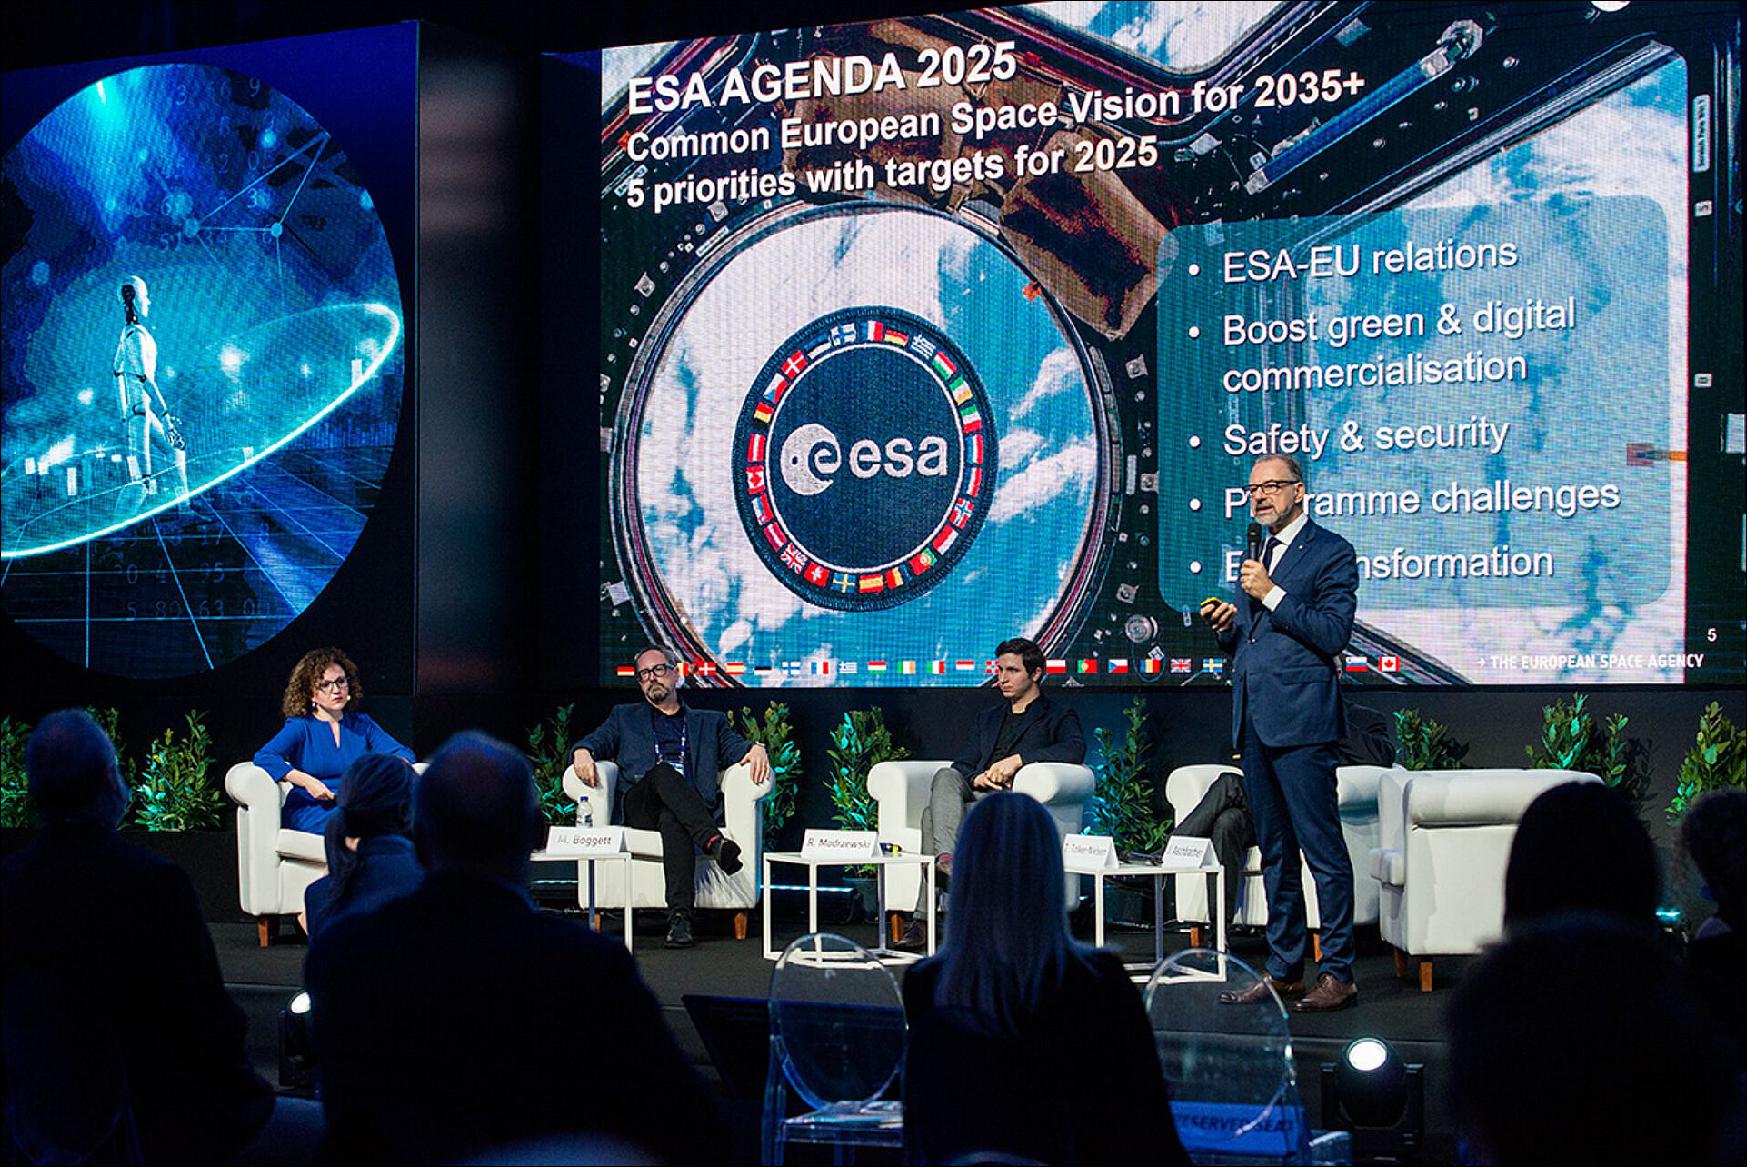 Figure 18: Josef Aschbacher, ESA’s Director General, speaking at the opening of ESA's Φ-week 2021. In his address, he explained how his priorities include transforming ESA and boosting green and digital commercialization, as outlined in Agenda 2025 (image credit: ESA, V. Stefanelli)